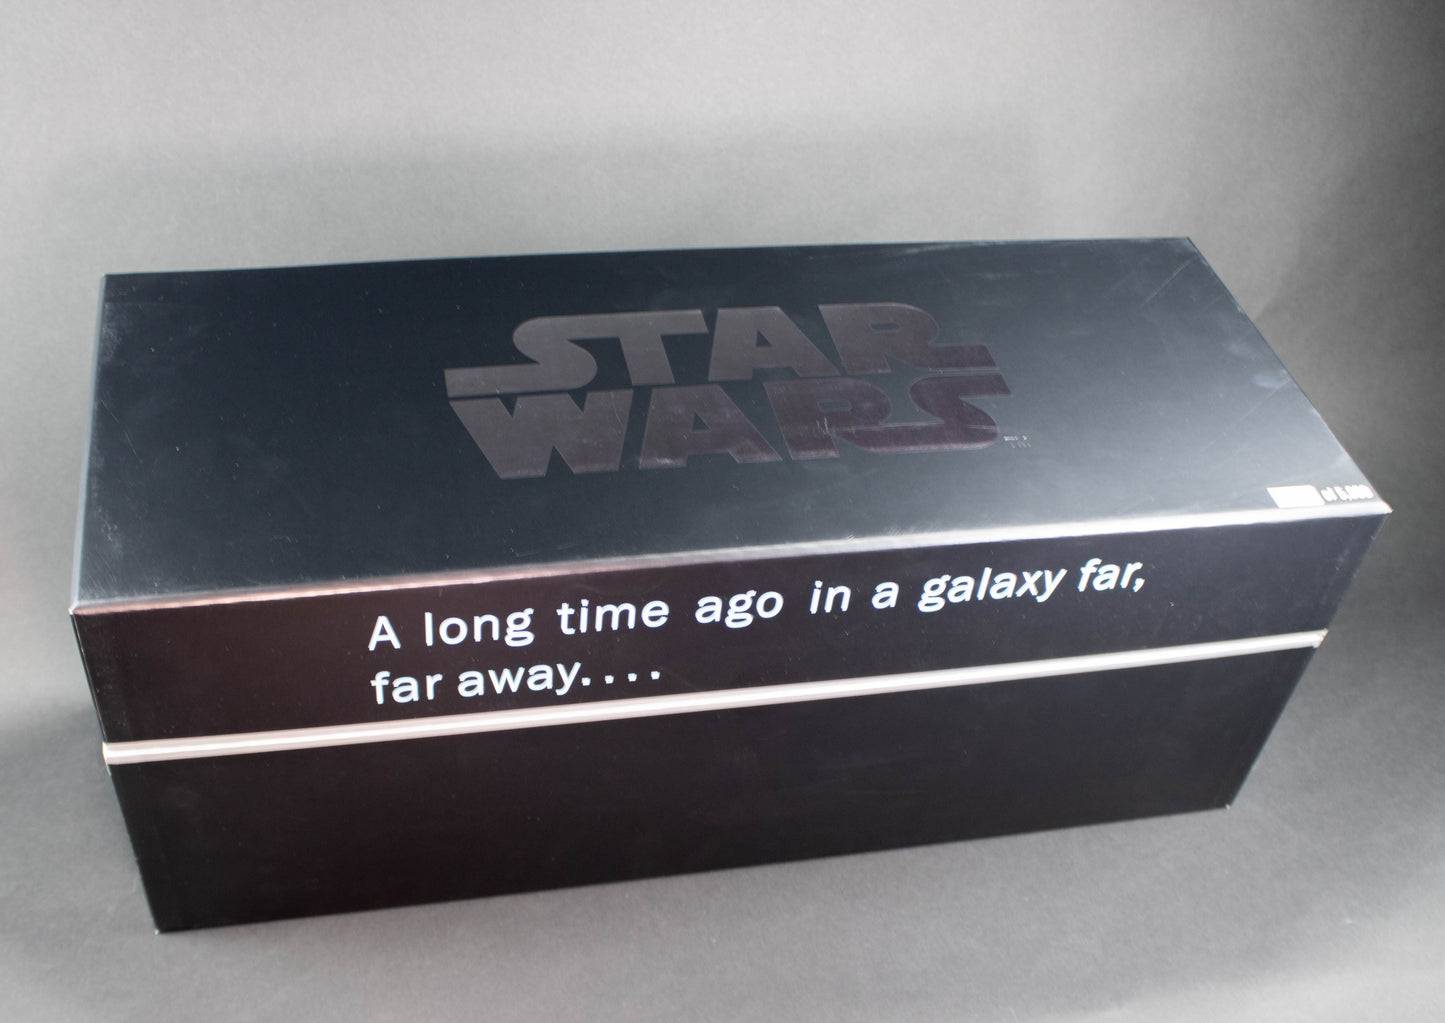 Load image into Gallery viewer, The Force Pack (Star Wars) Limited Edition Prop Replica Boxed Gift Set
